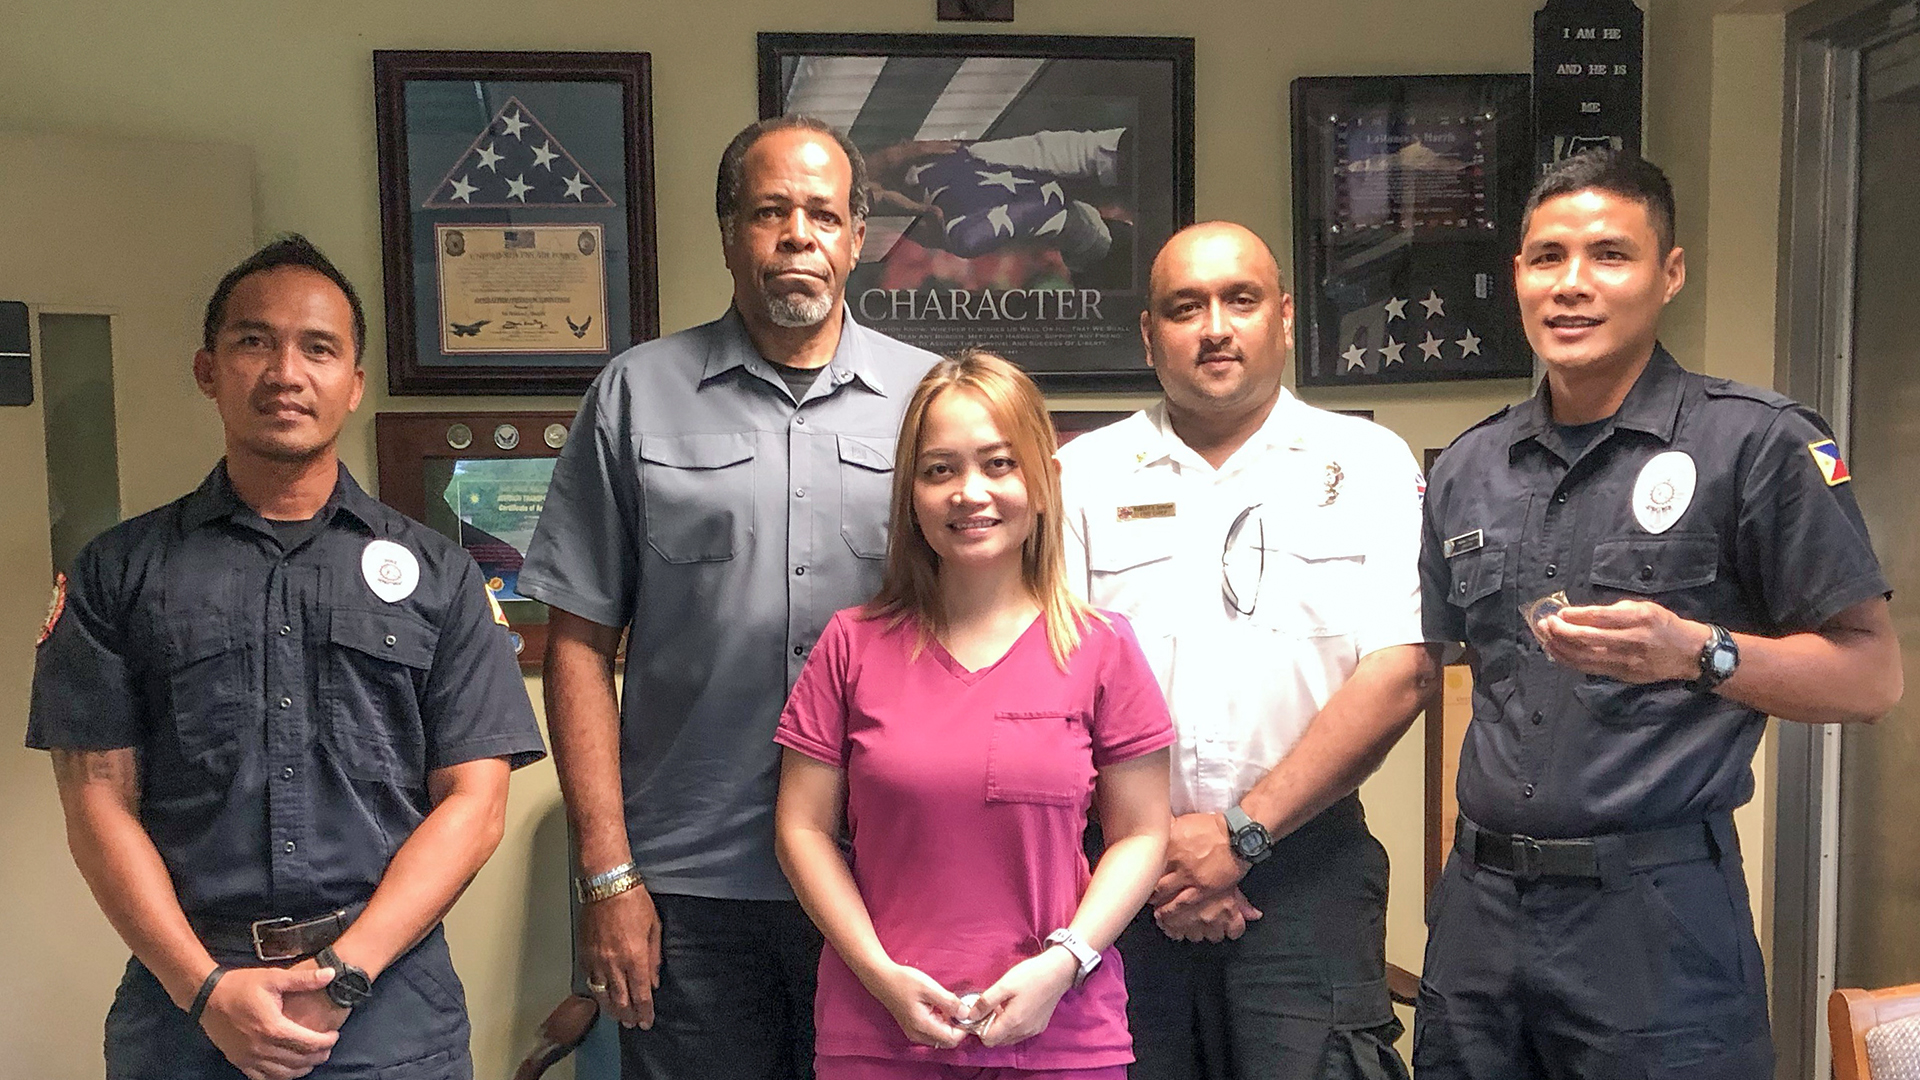 KBR Firefighters And Nurse Receive Recognition Coins For Life Saving Actions